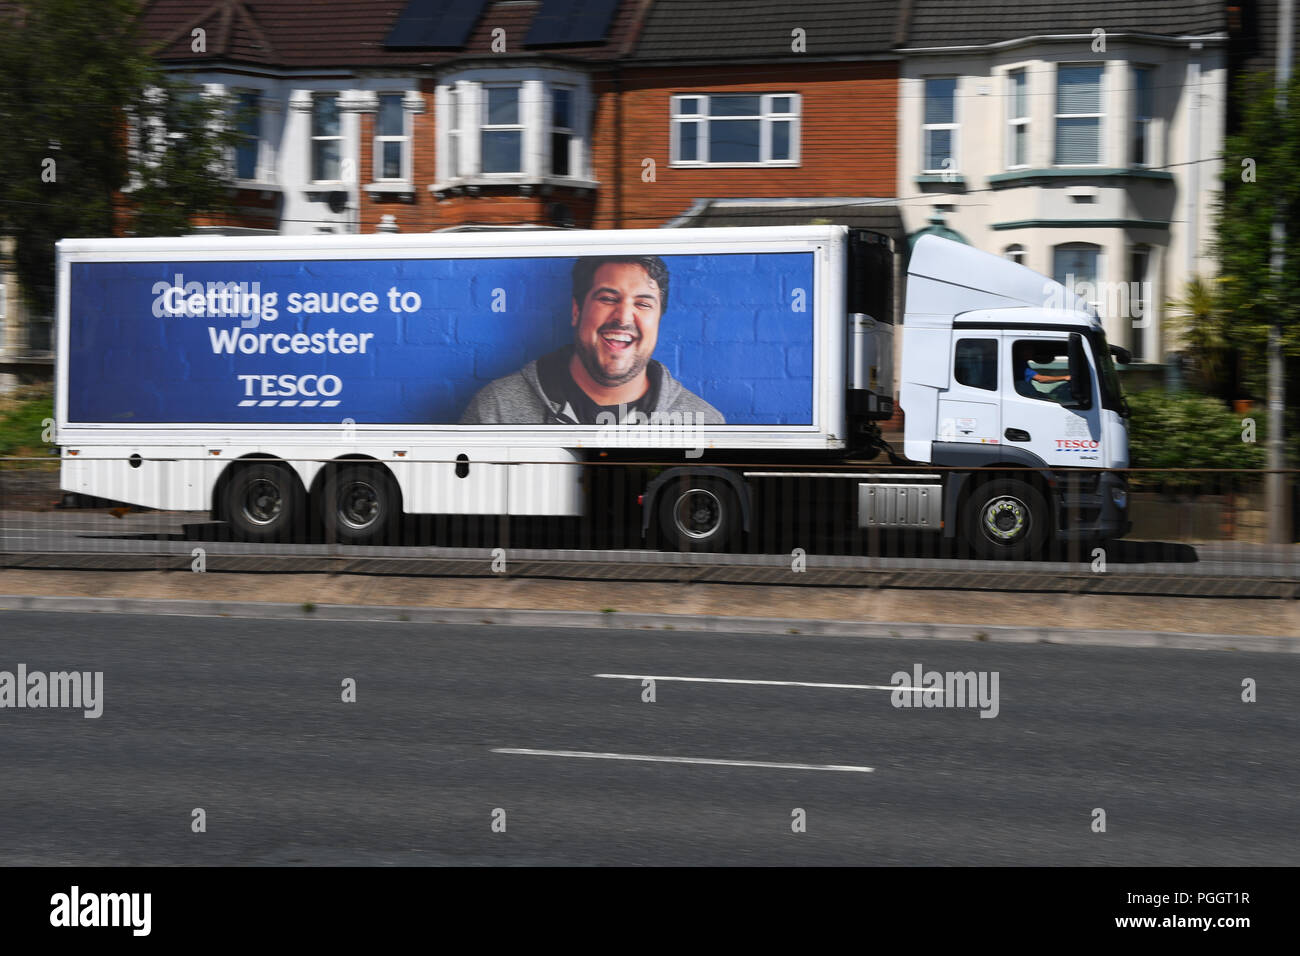 A Tesco truck driving along the road with Getting to Worcester advertising campaign on the side featuring a smiling male. Stock Photo